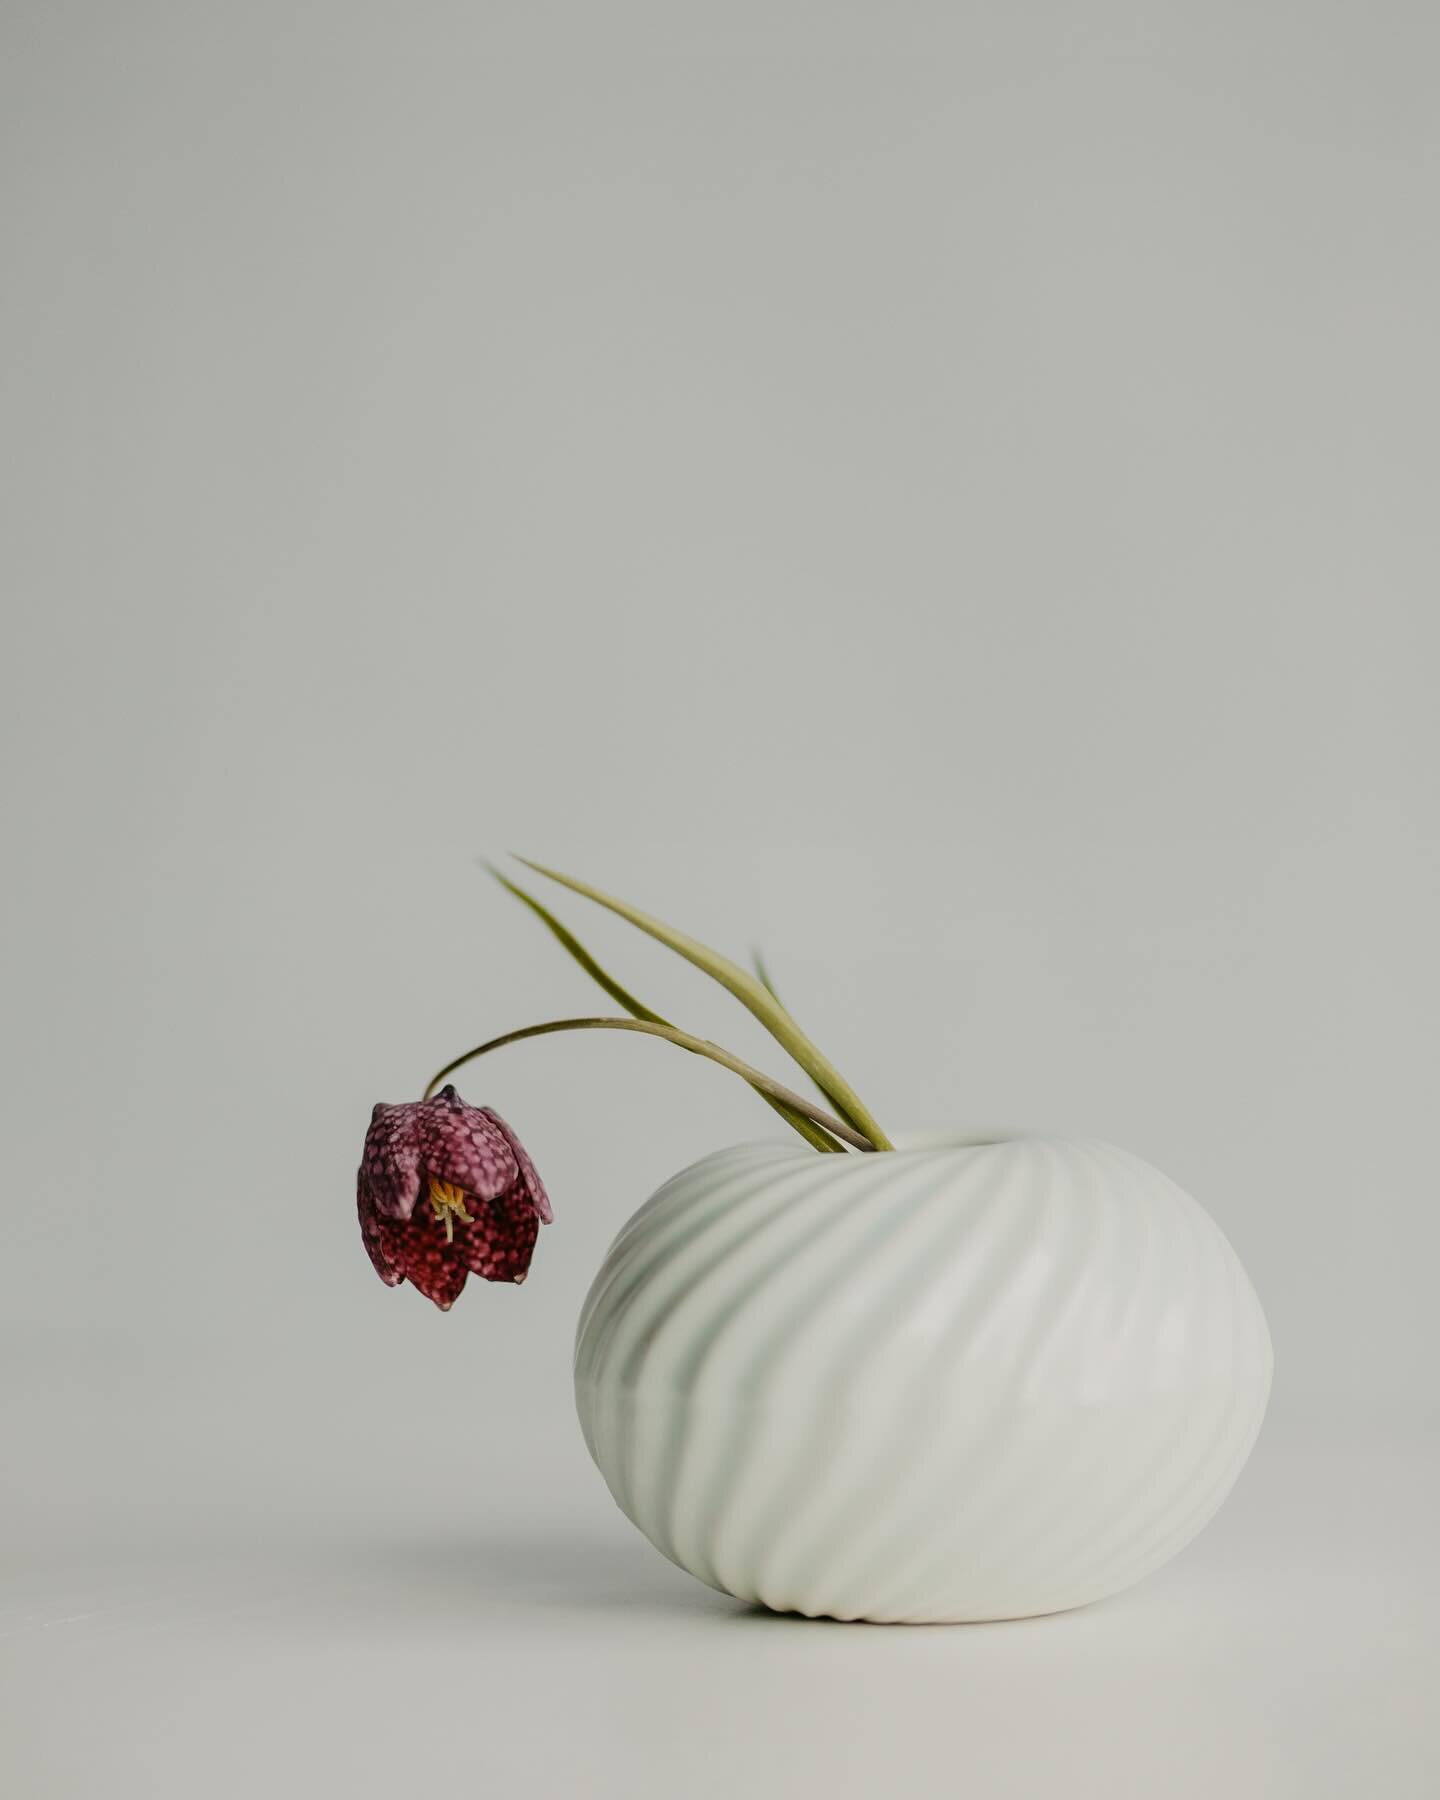 Slipcast piece with my absolute favourite flower, #fritillariameleagris or #snakeheadflower - only here in spring for a very short time. A beautiful flower to accompany the soft delicate porcelain glazed in a very light #celadon glaze.

This small va